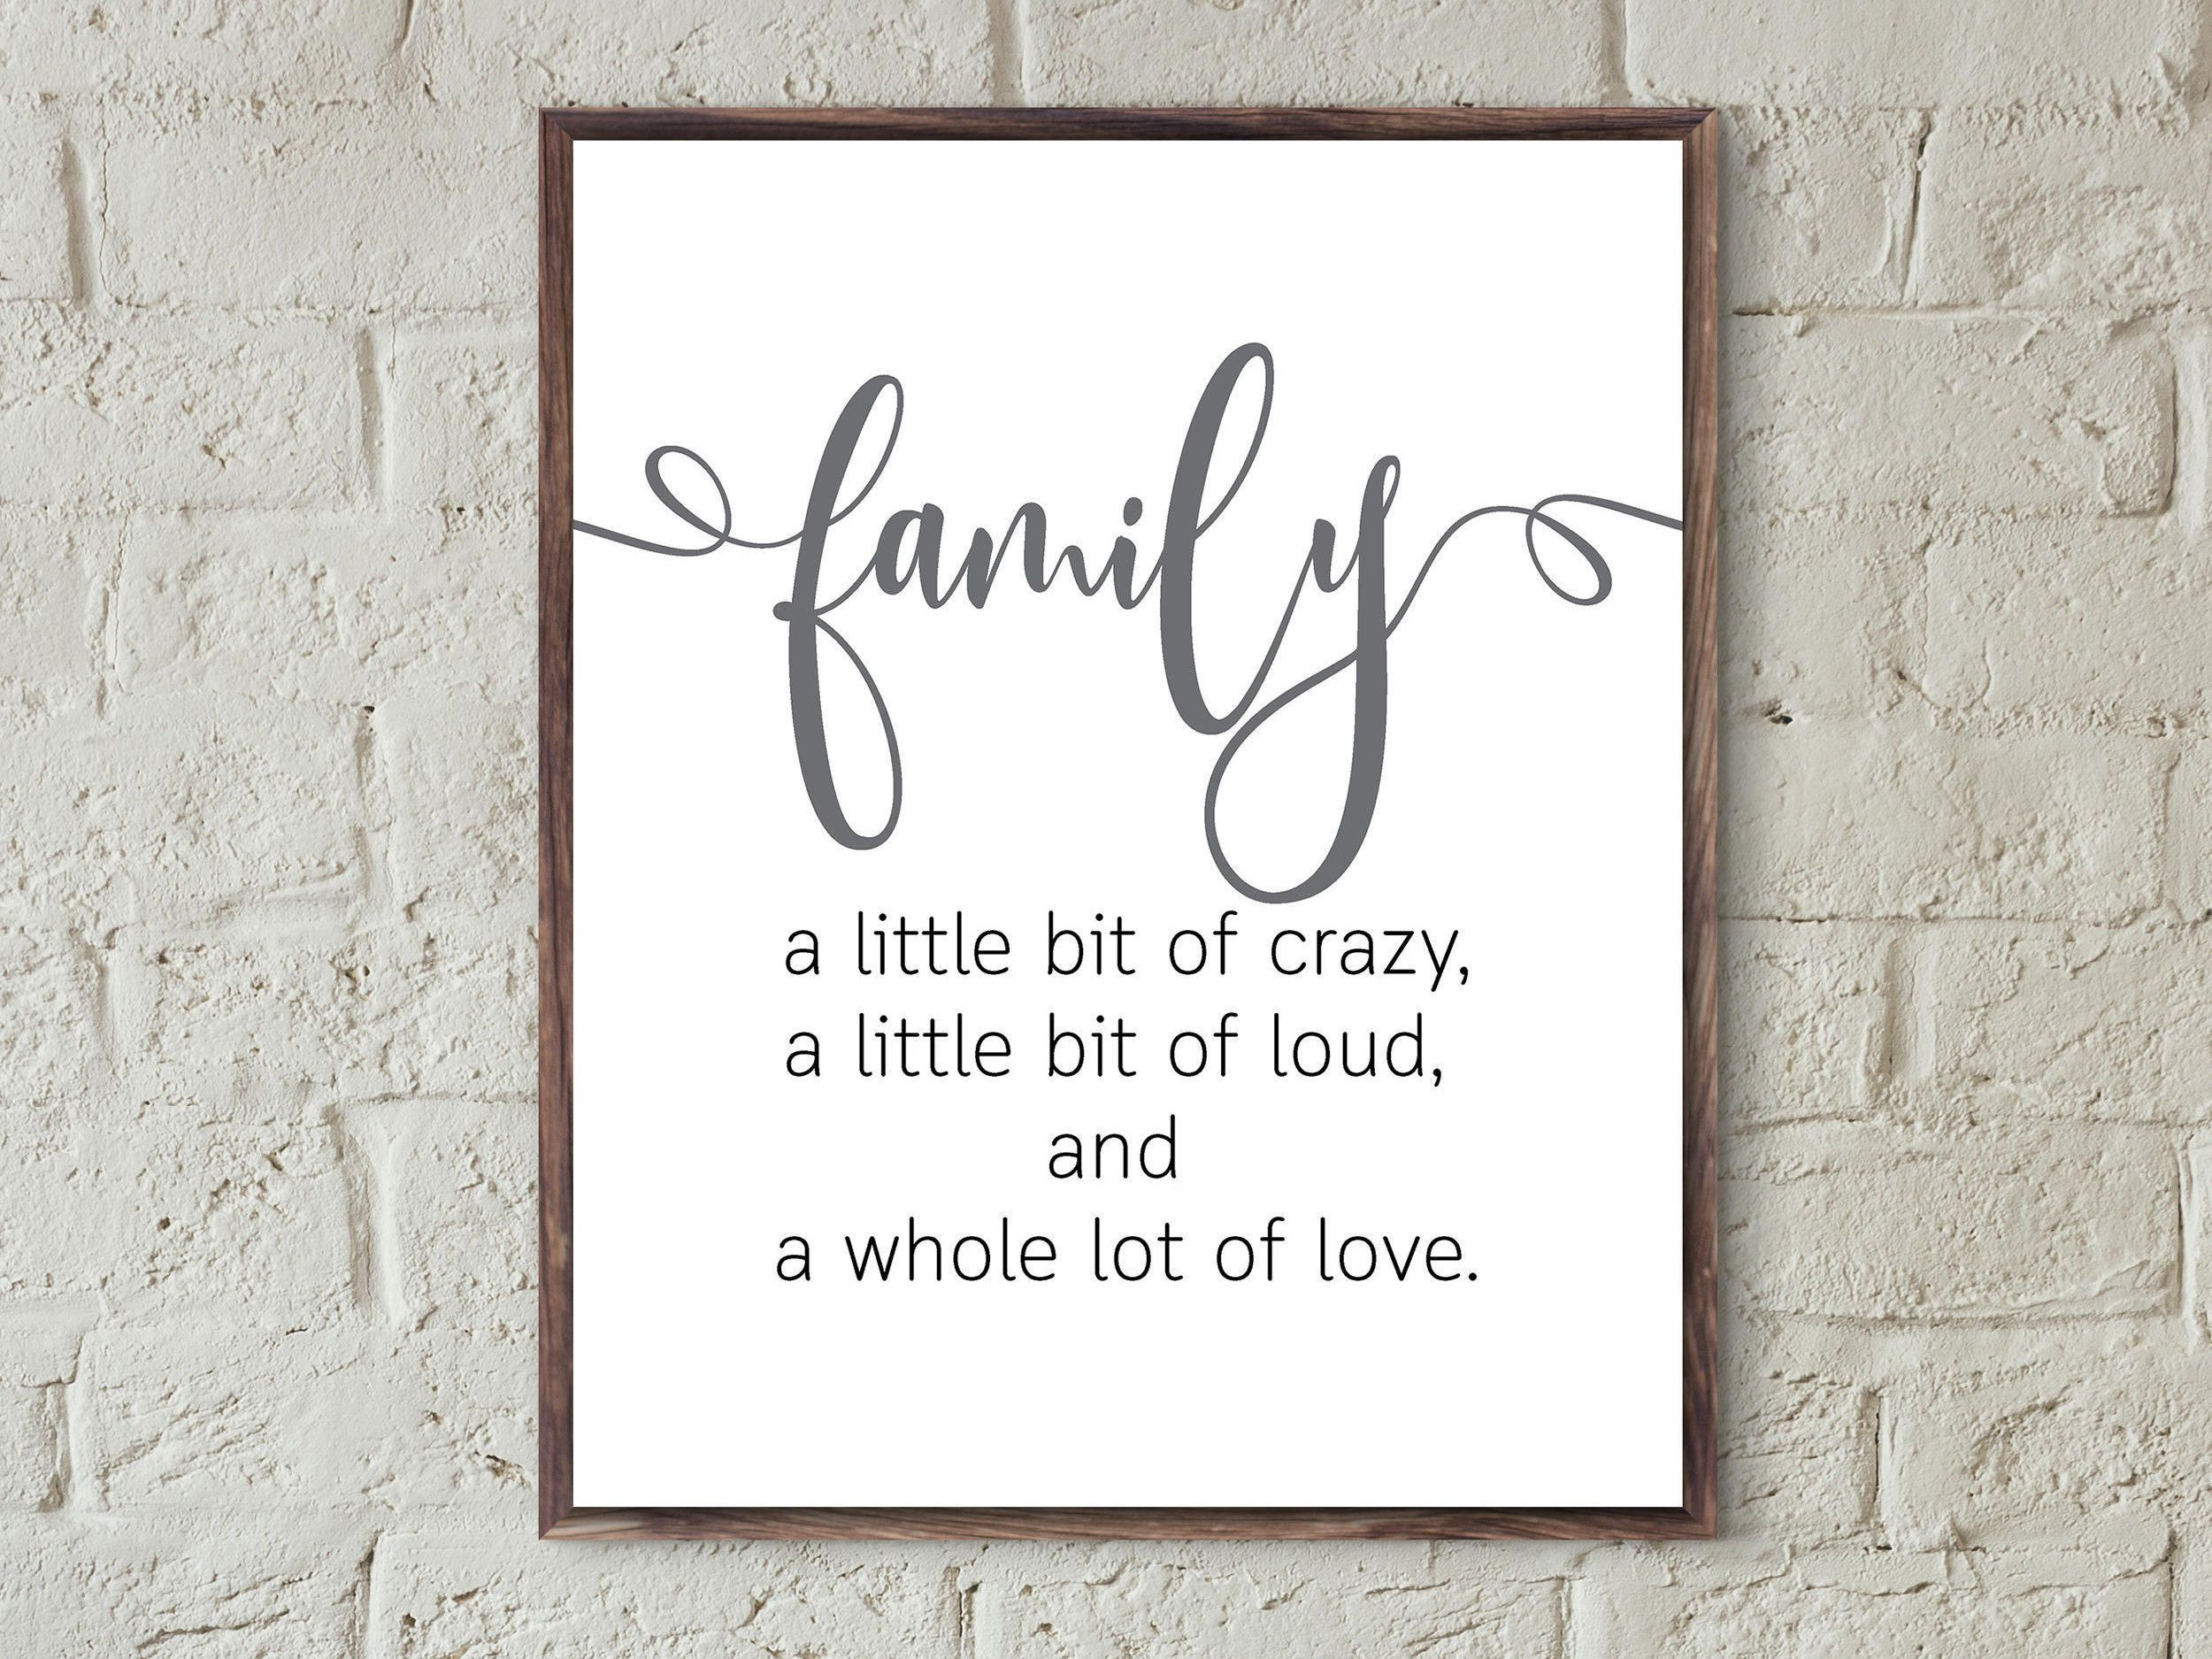 Quotes About Crazy Family
 family prints quotes wall art family little bit